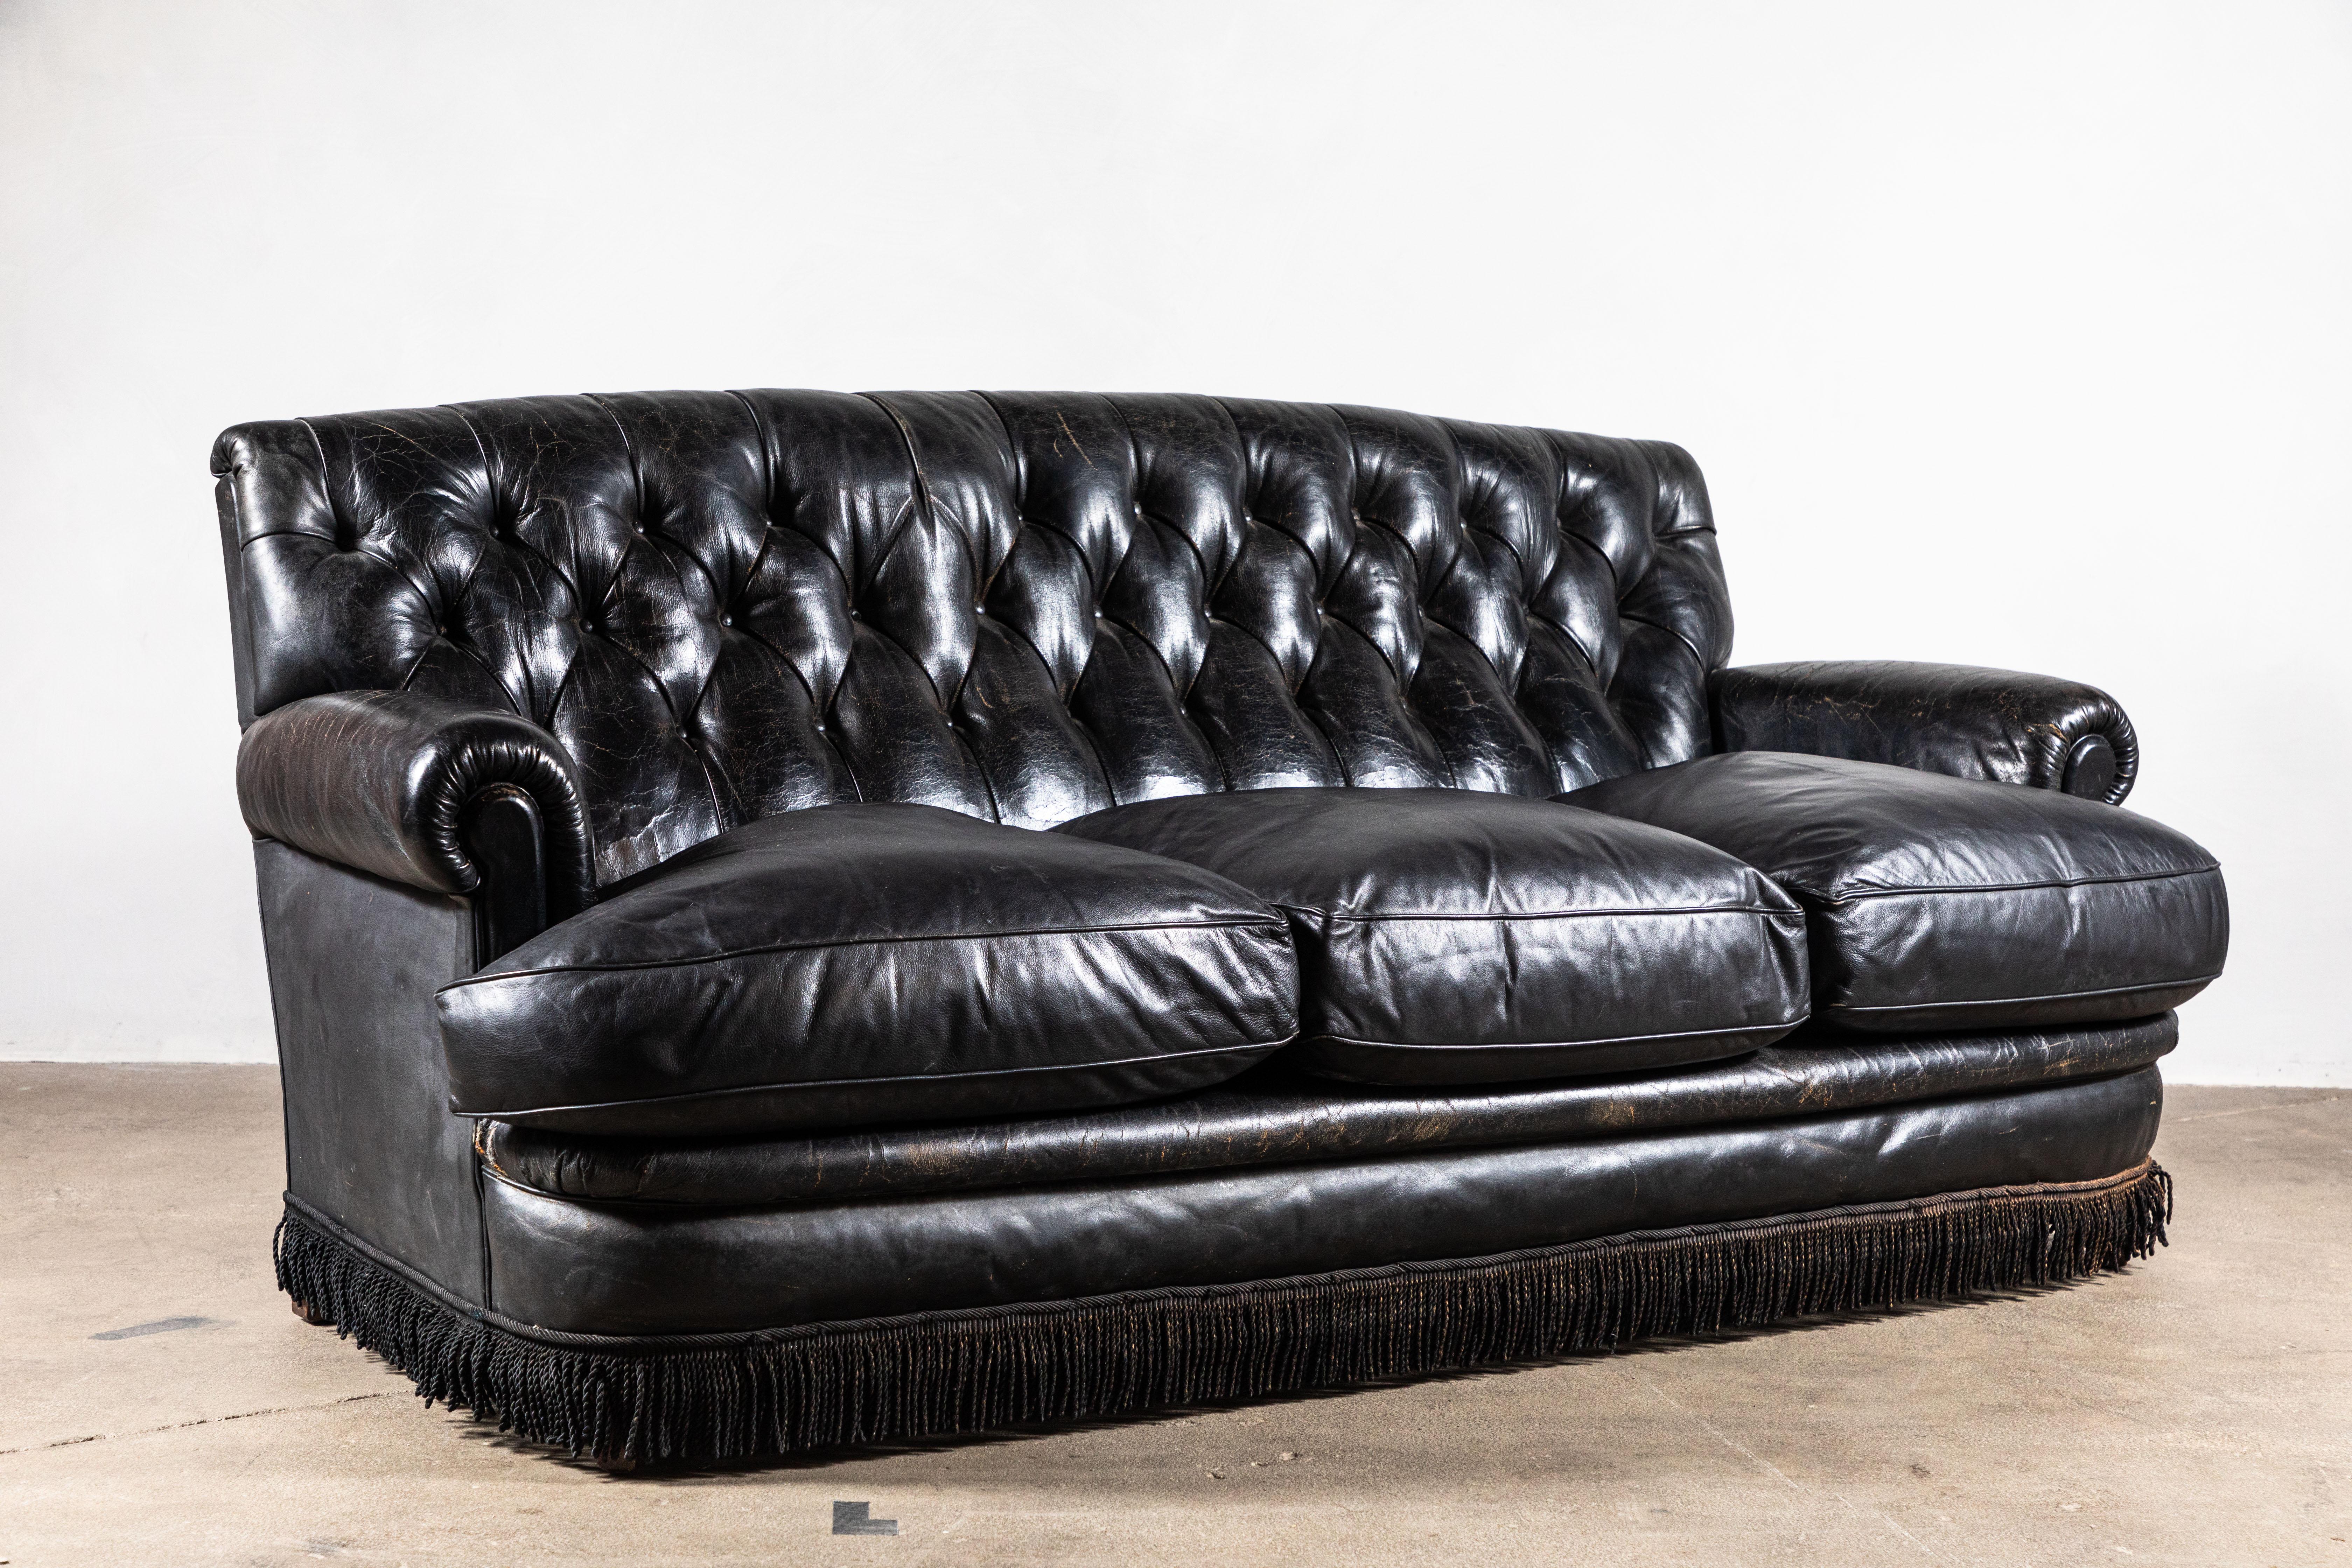 Black leather tufted sofa with three loose seat cushions. The sofa is finished with original fringe details.